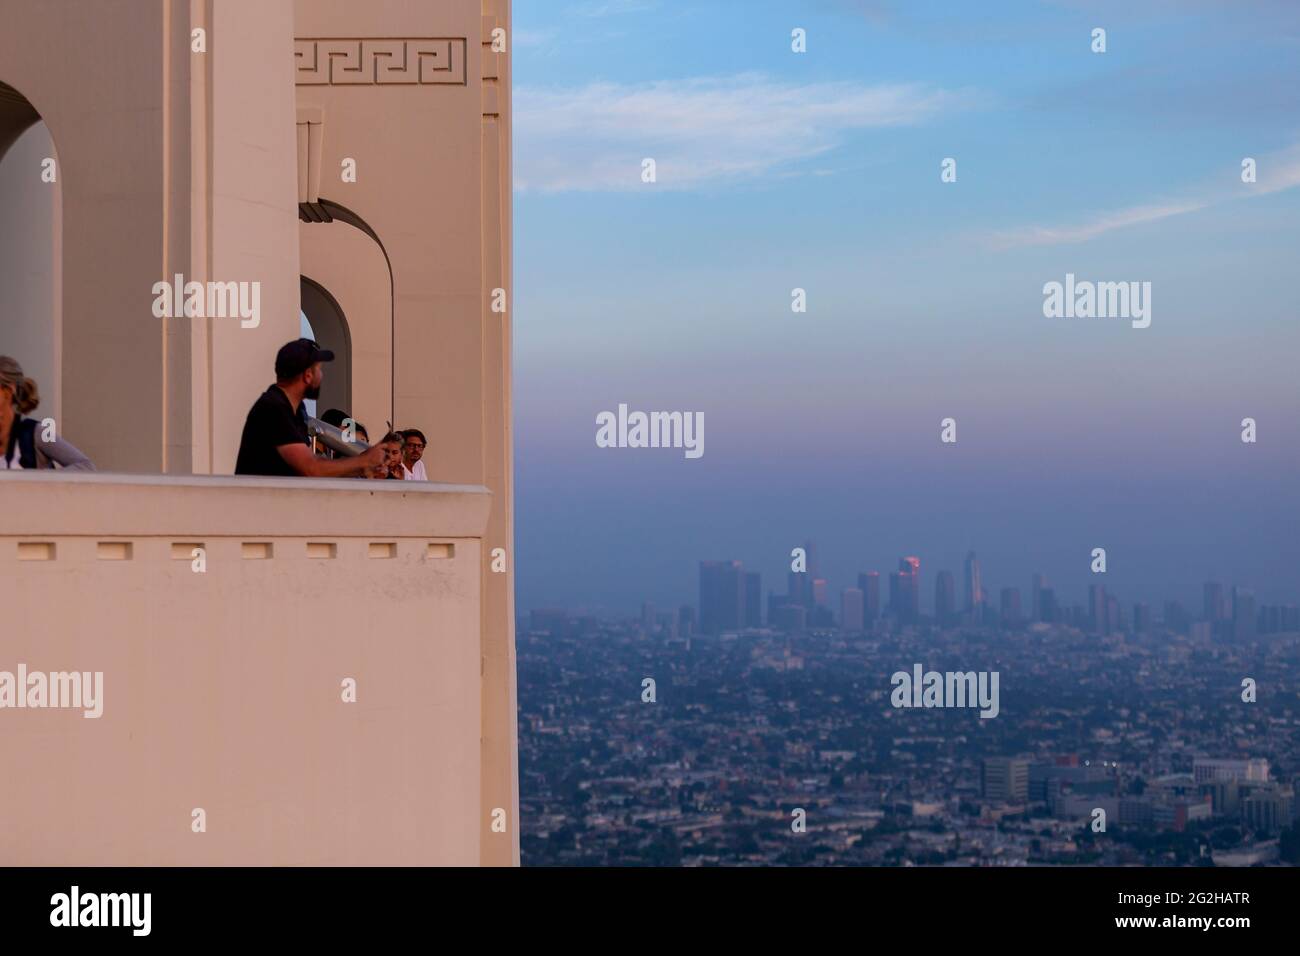 Famous Griffith Observatory museum building on the Hollywood Hills in Los Angeles, California, USA Stock Photo